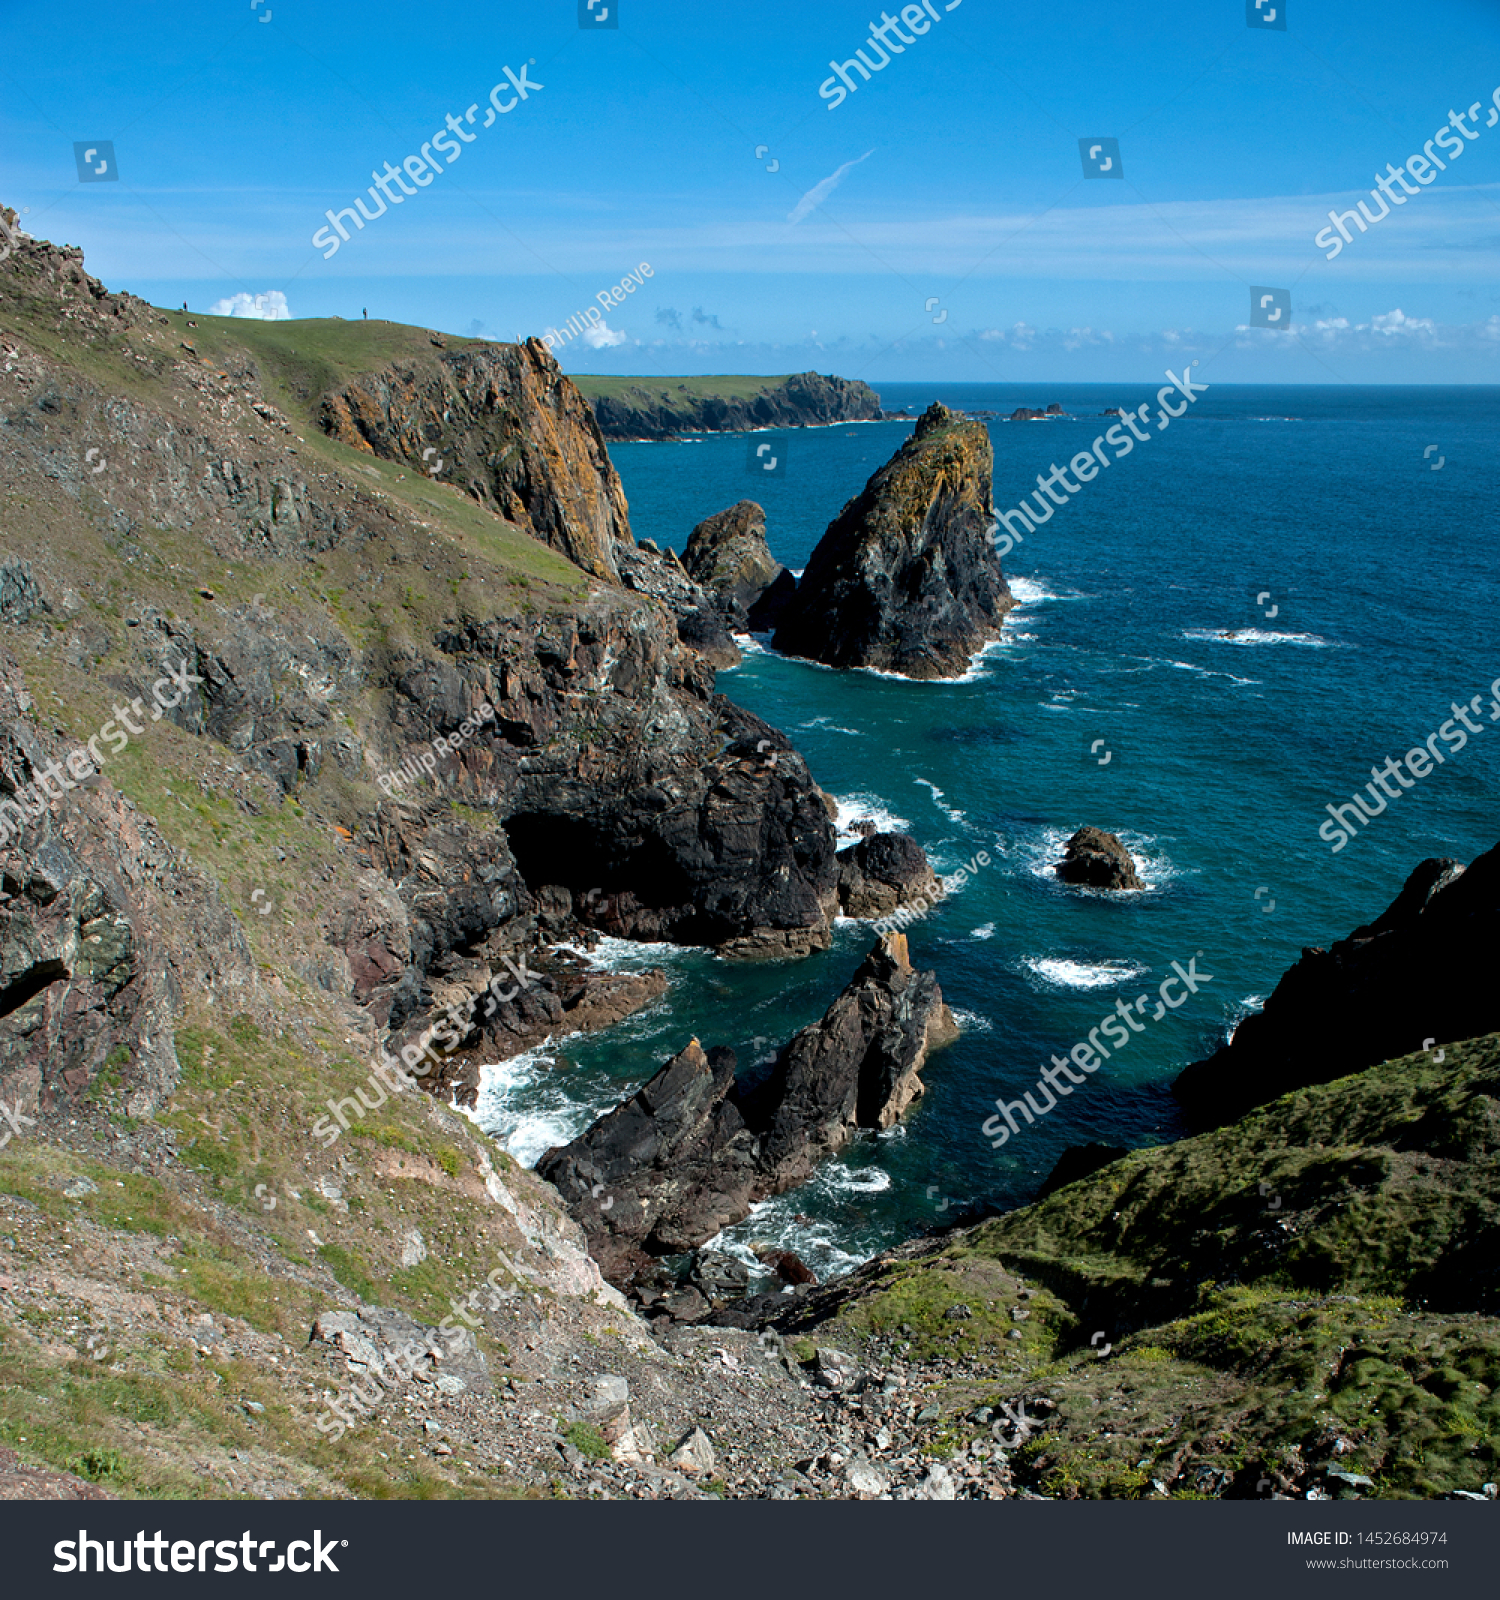 The dramatic coastline and cliffs near Kynance Cove in Cornwall, England. #1452684974